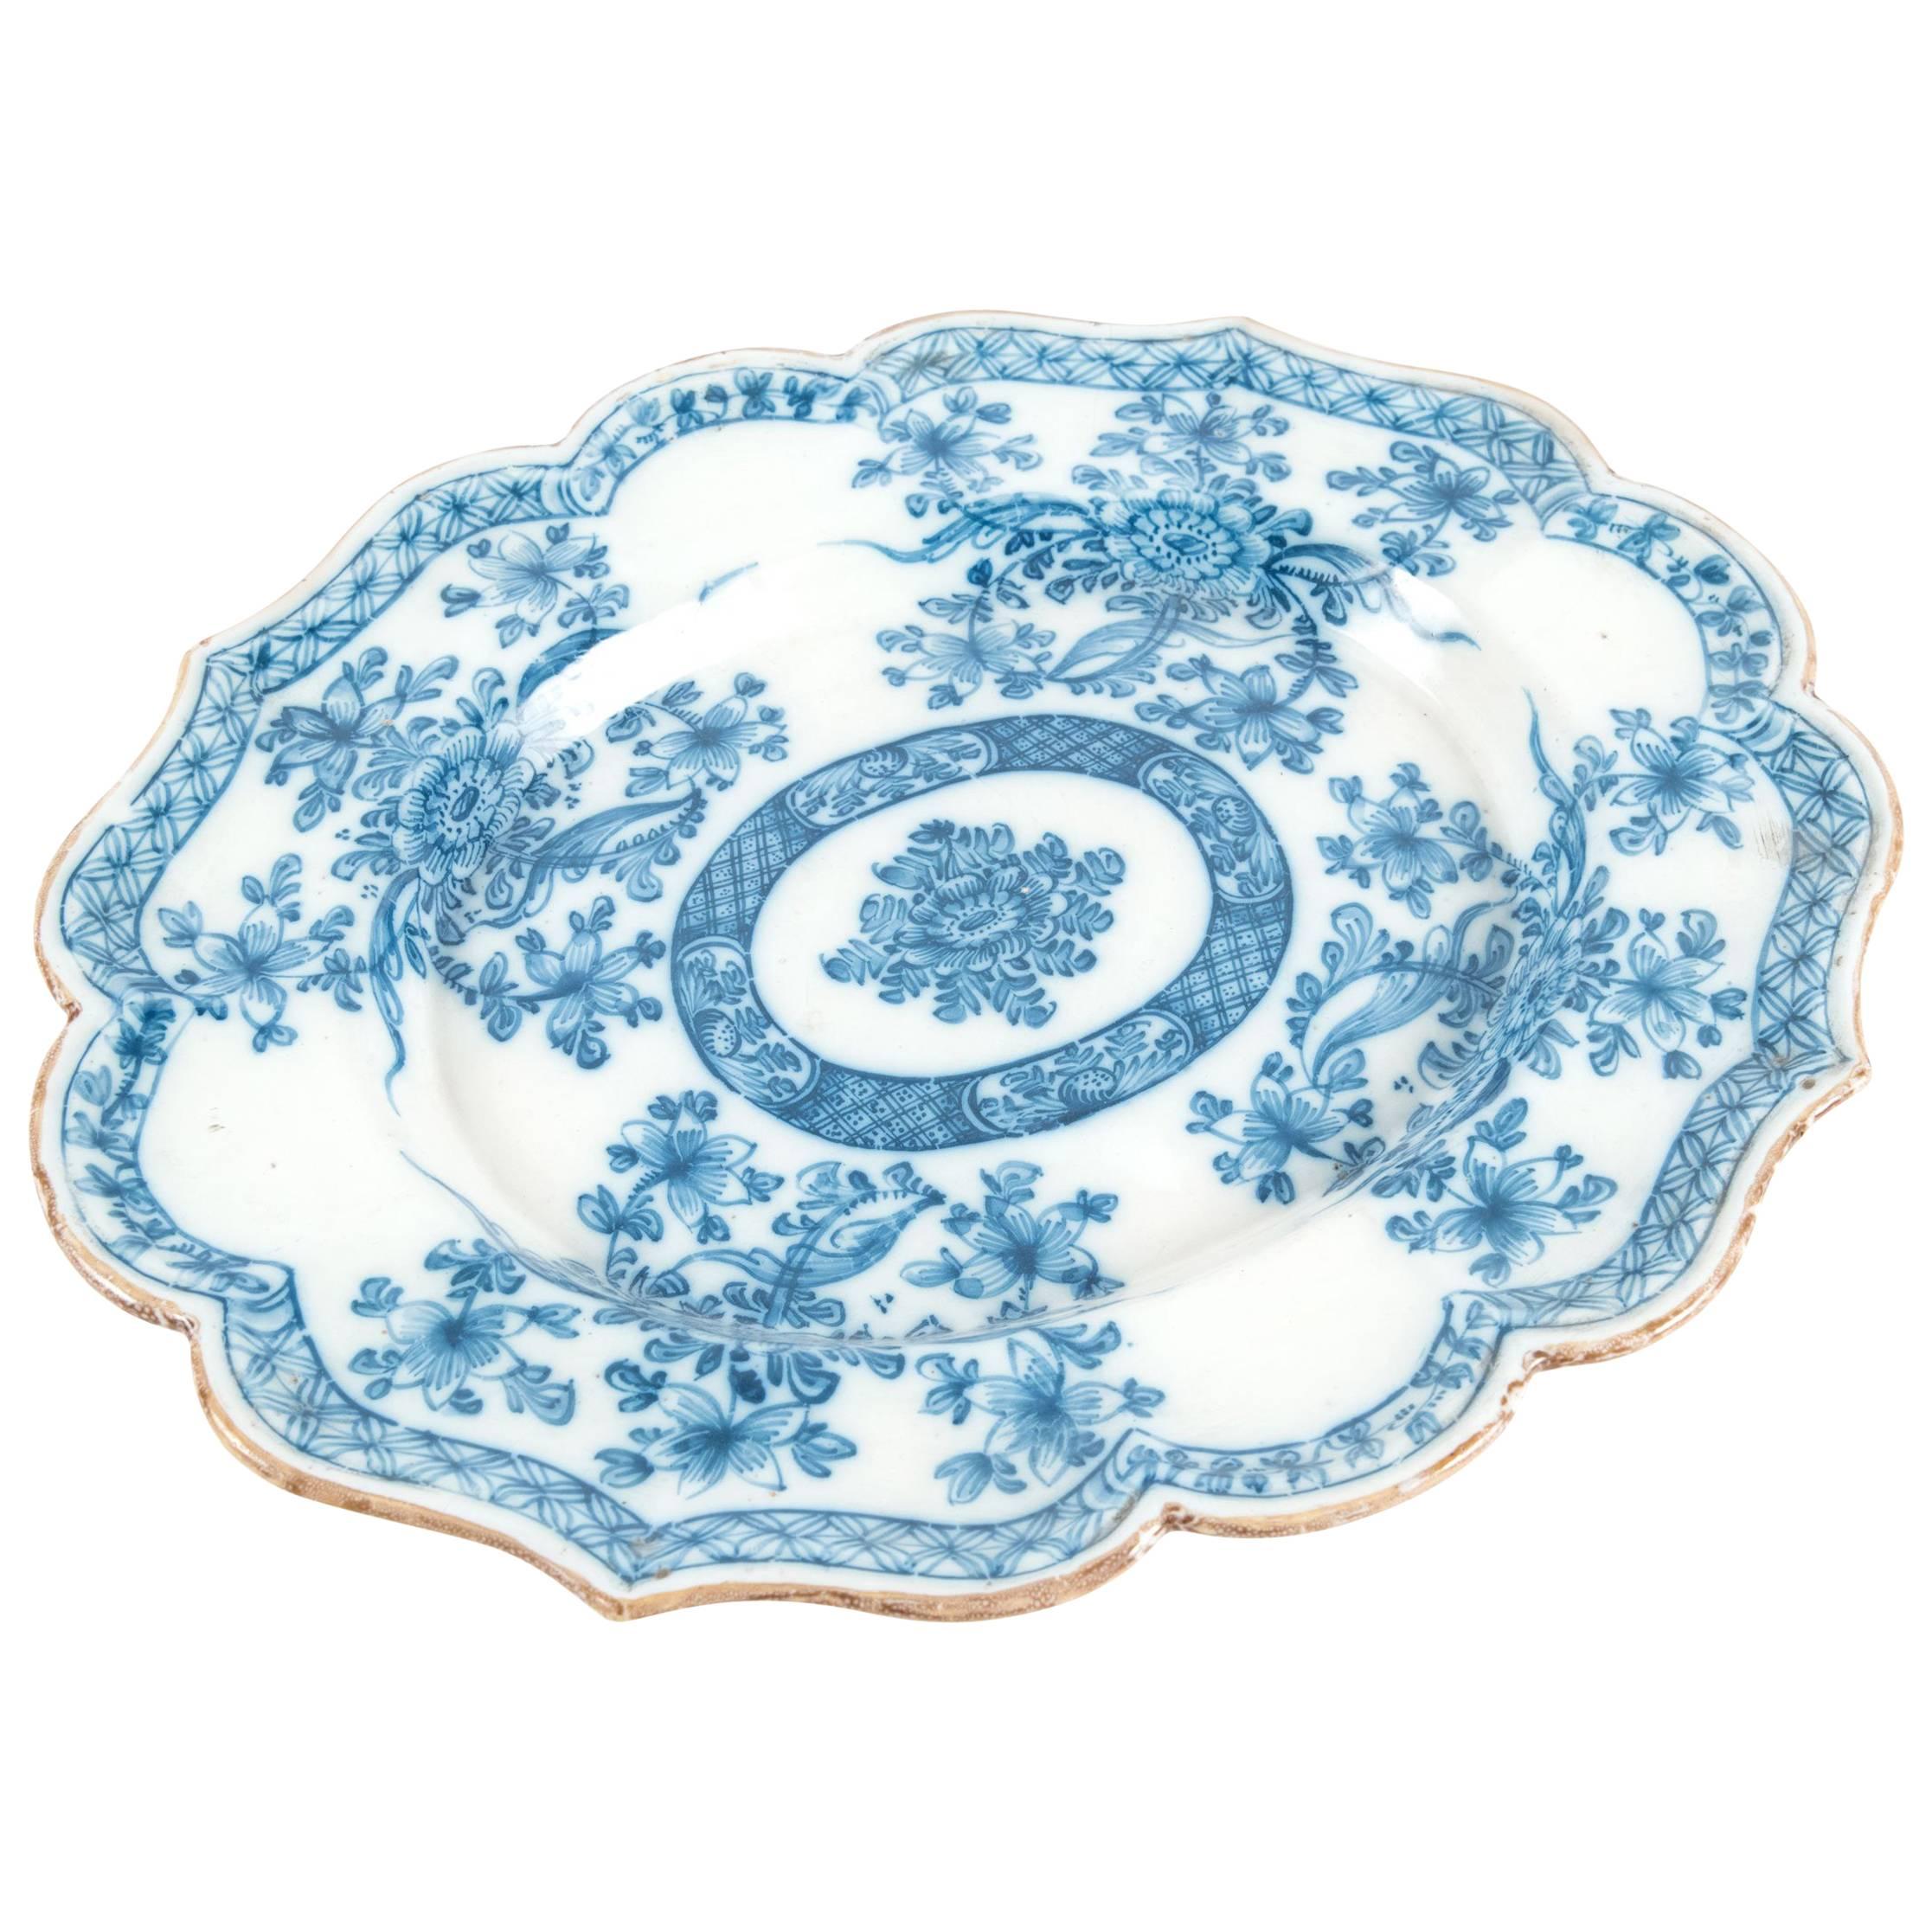 Chinese Lotus-Shape Blue and White Porcelain Plate